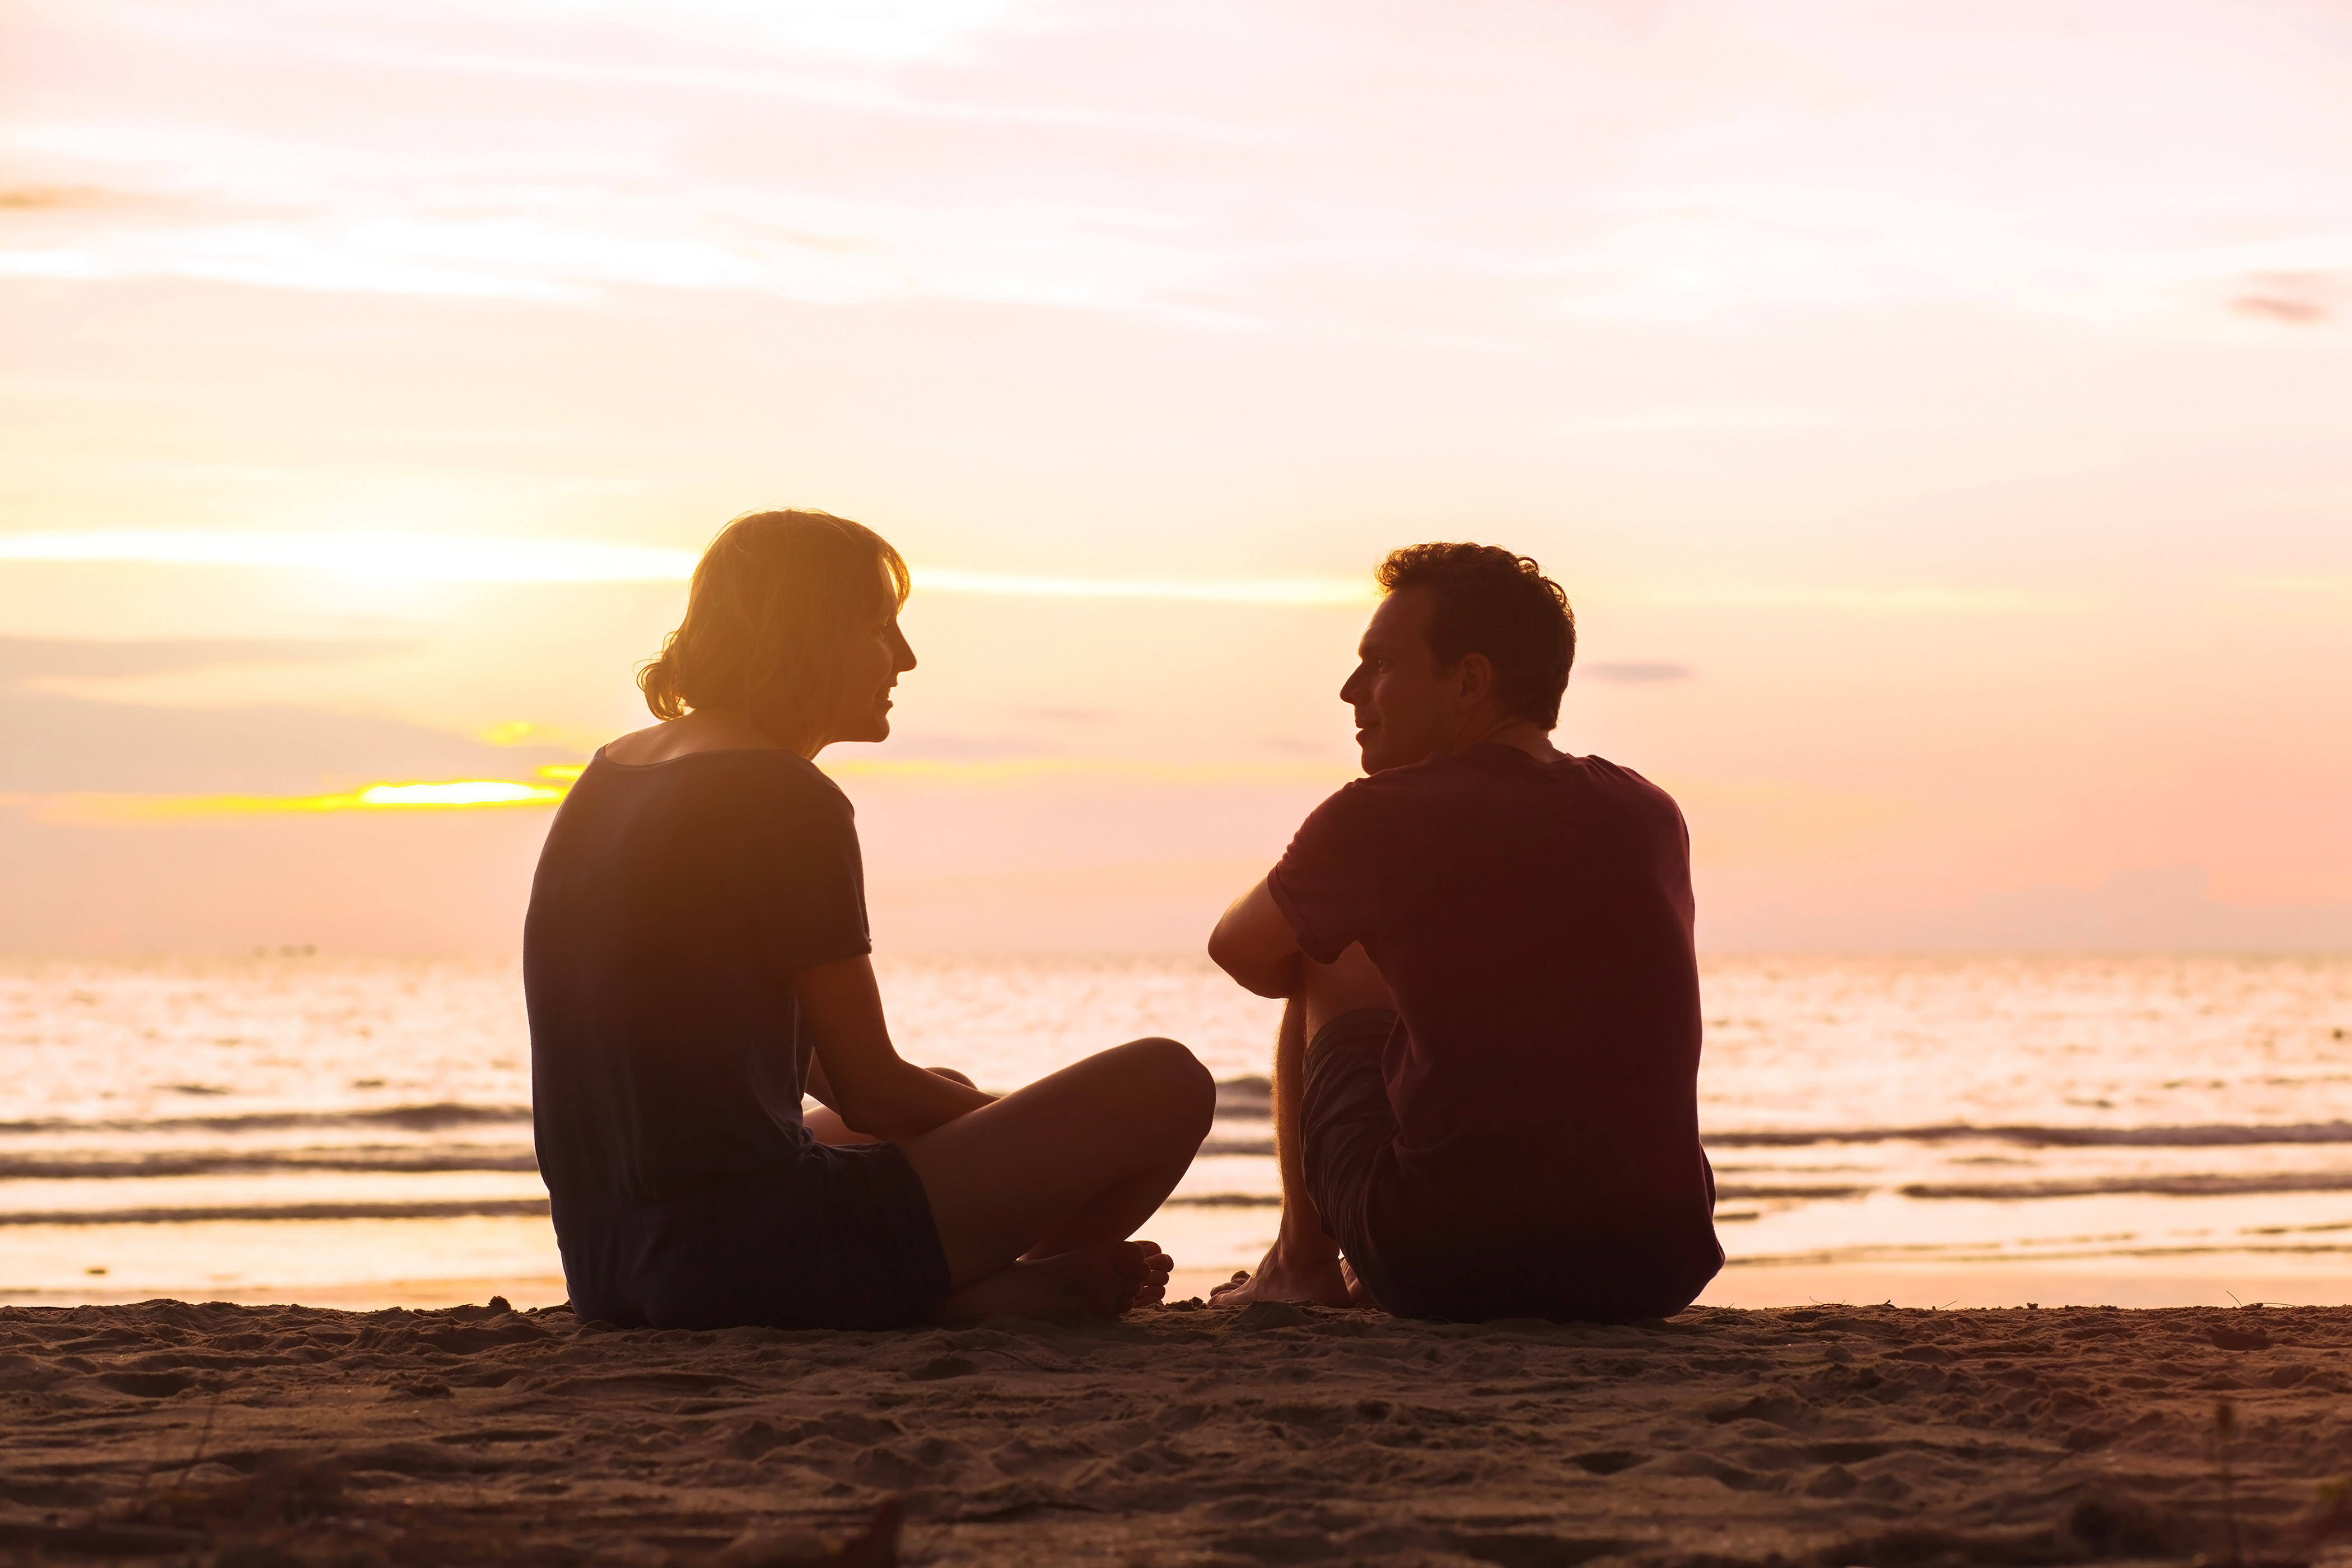 My Same-Sex Attraction and My Brother's Disease: On Suffering and Serenity  - Public Discourse